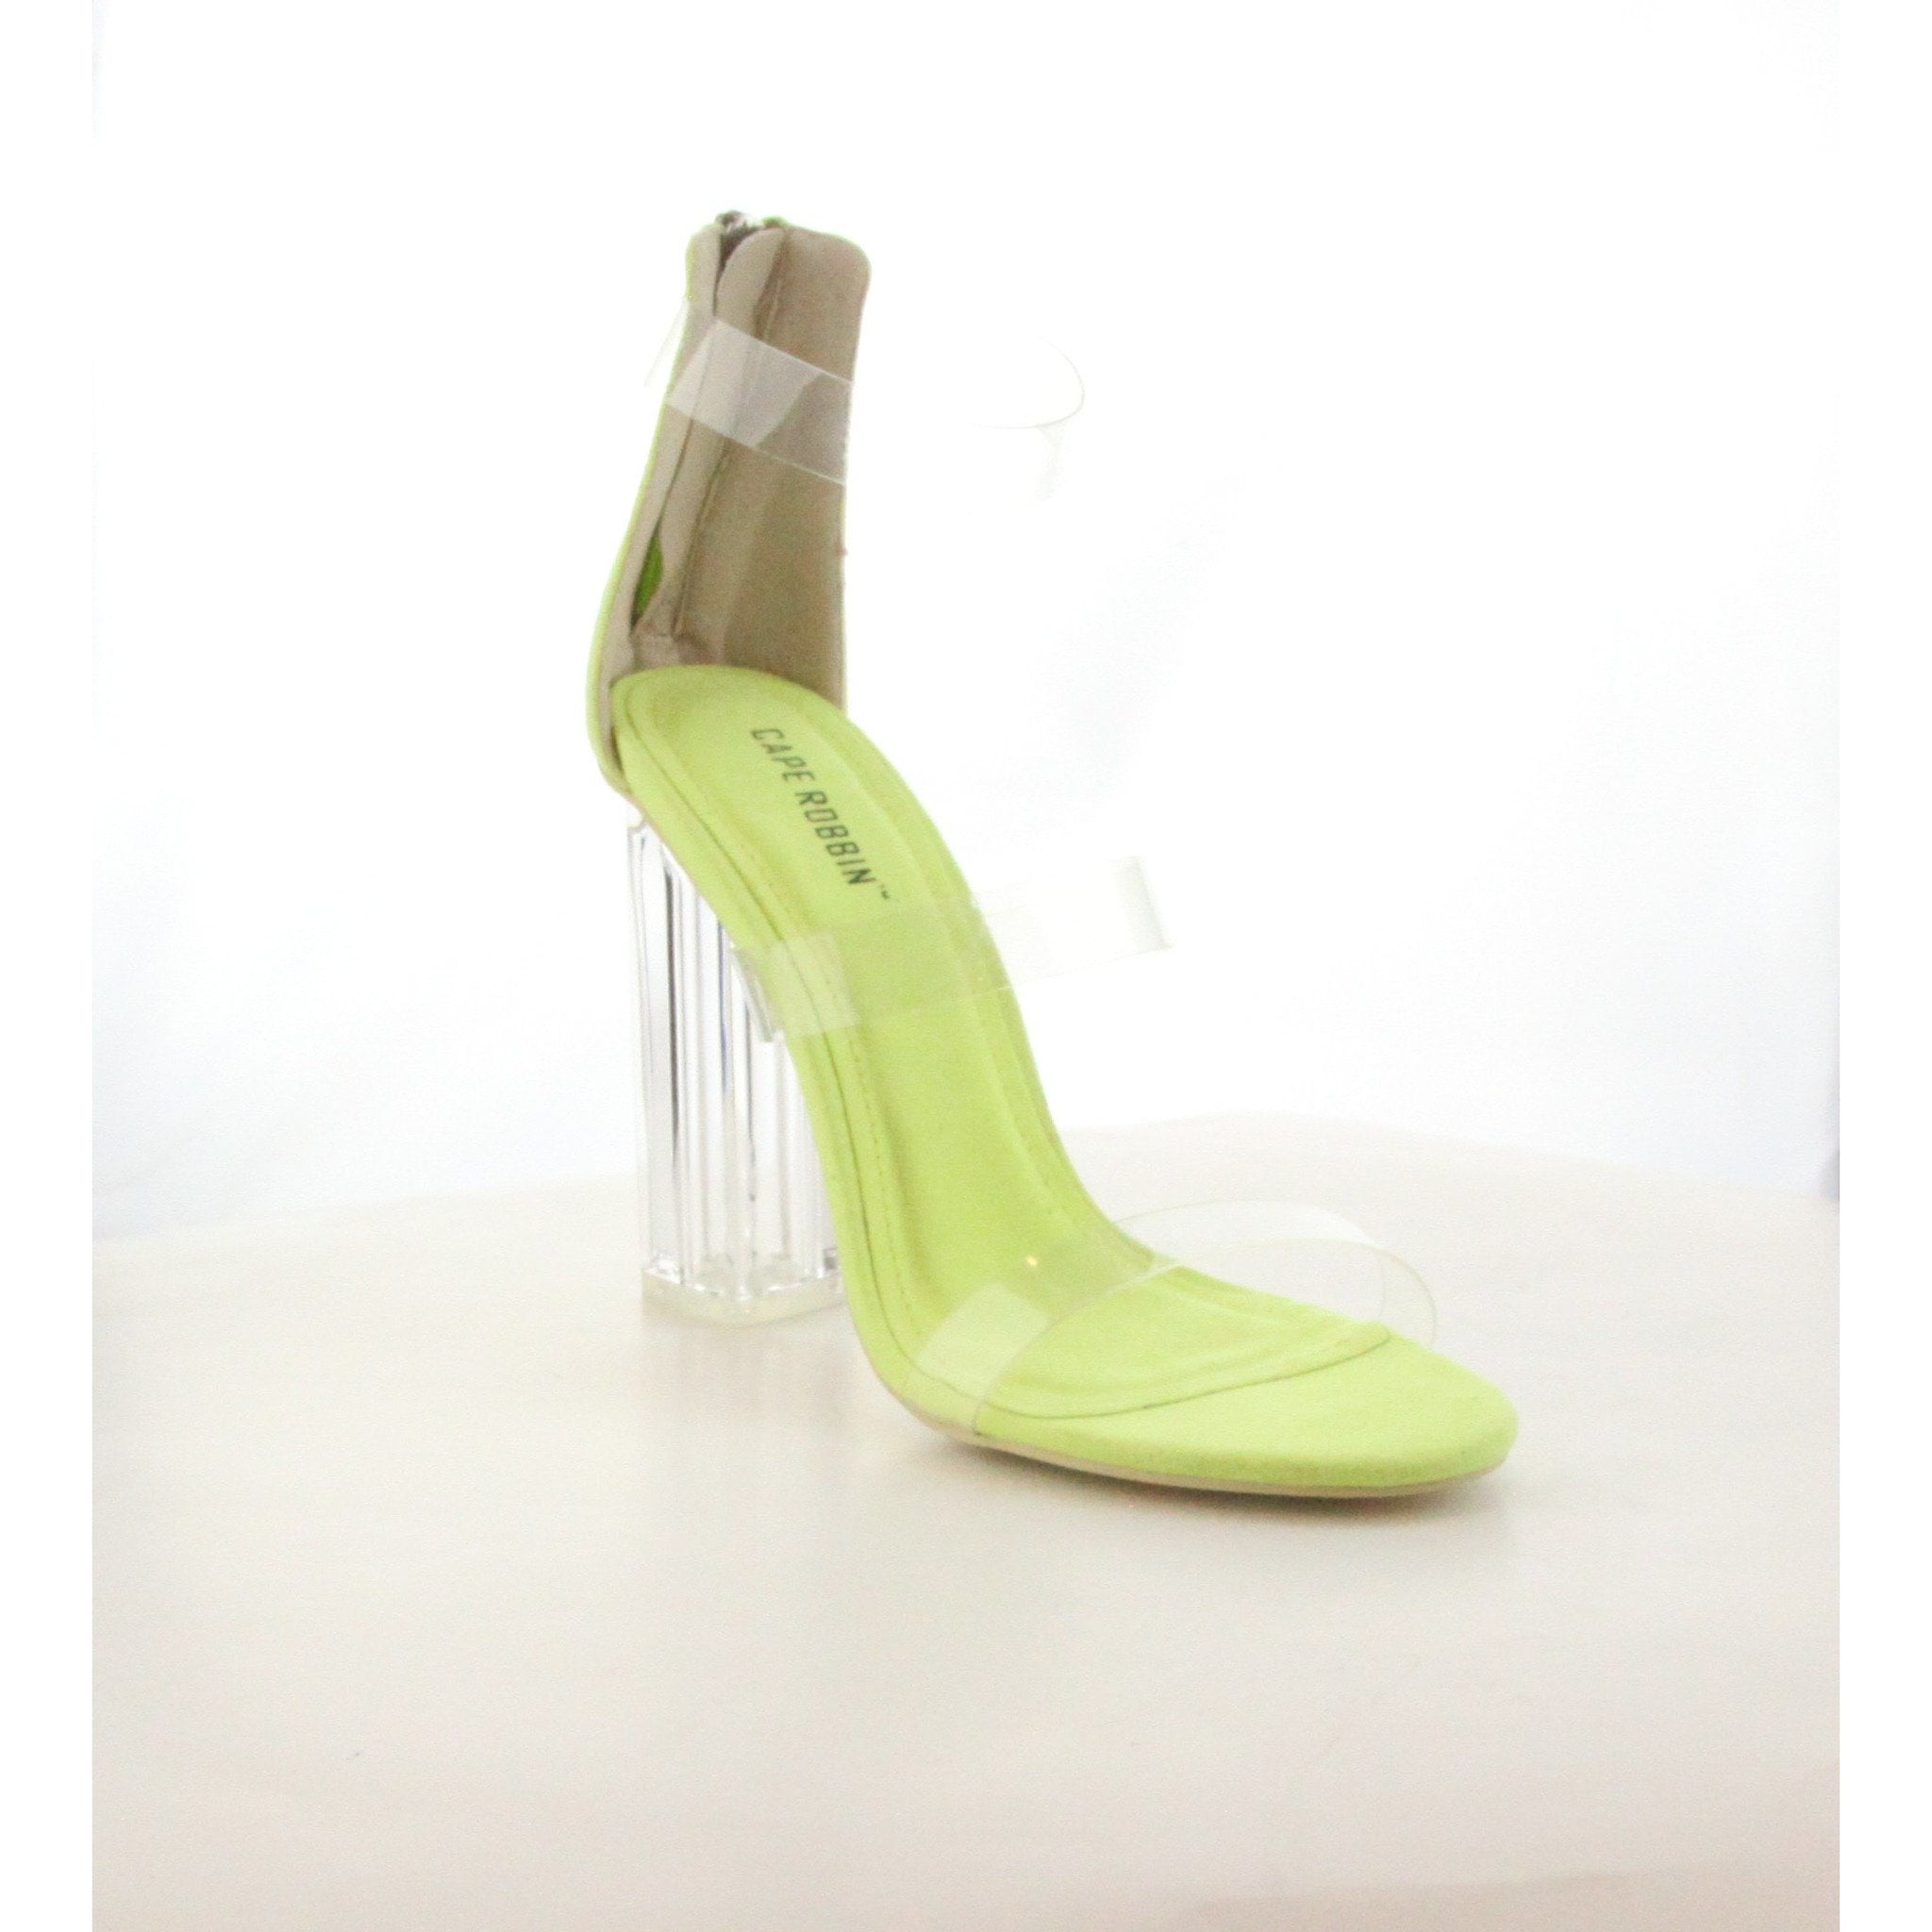 lime green clear heels